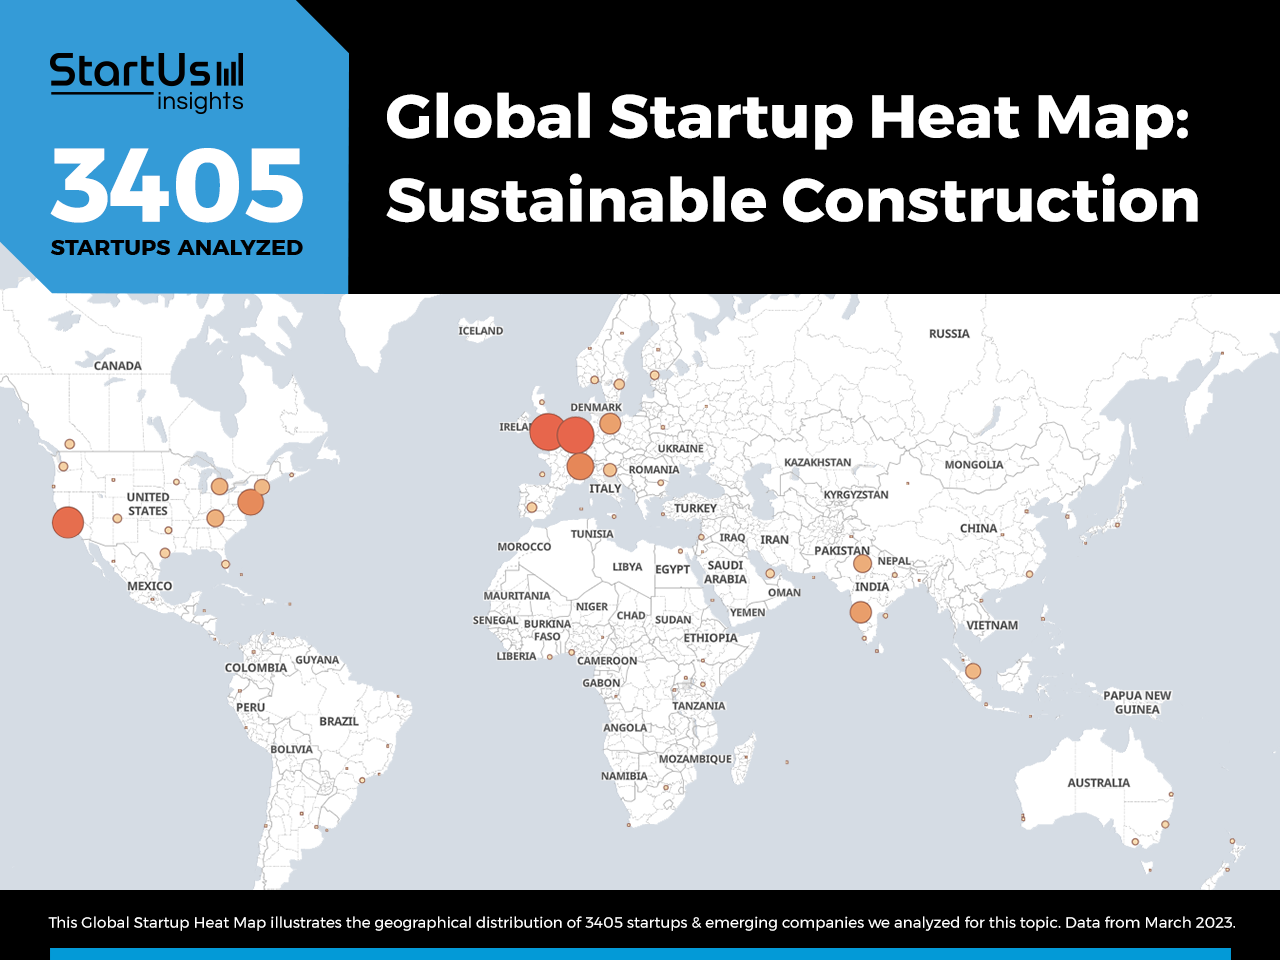 Sustainable-Construction-trends-Startups-Heat-Map-StartUs-Insights-noresize